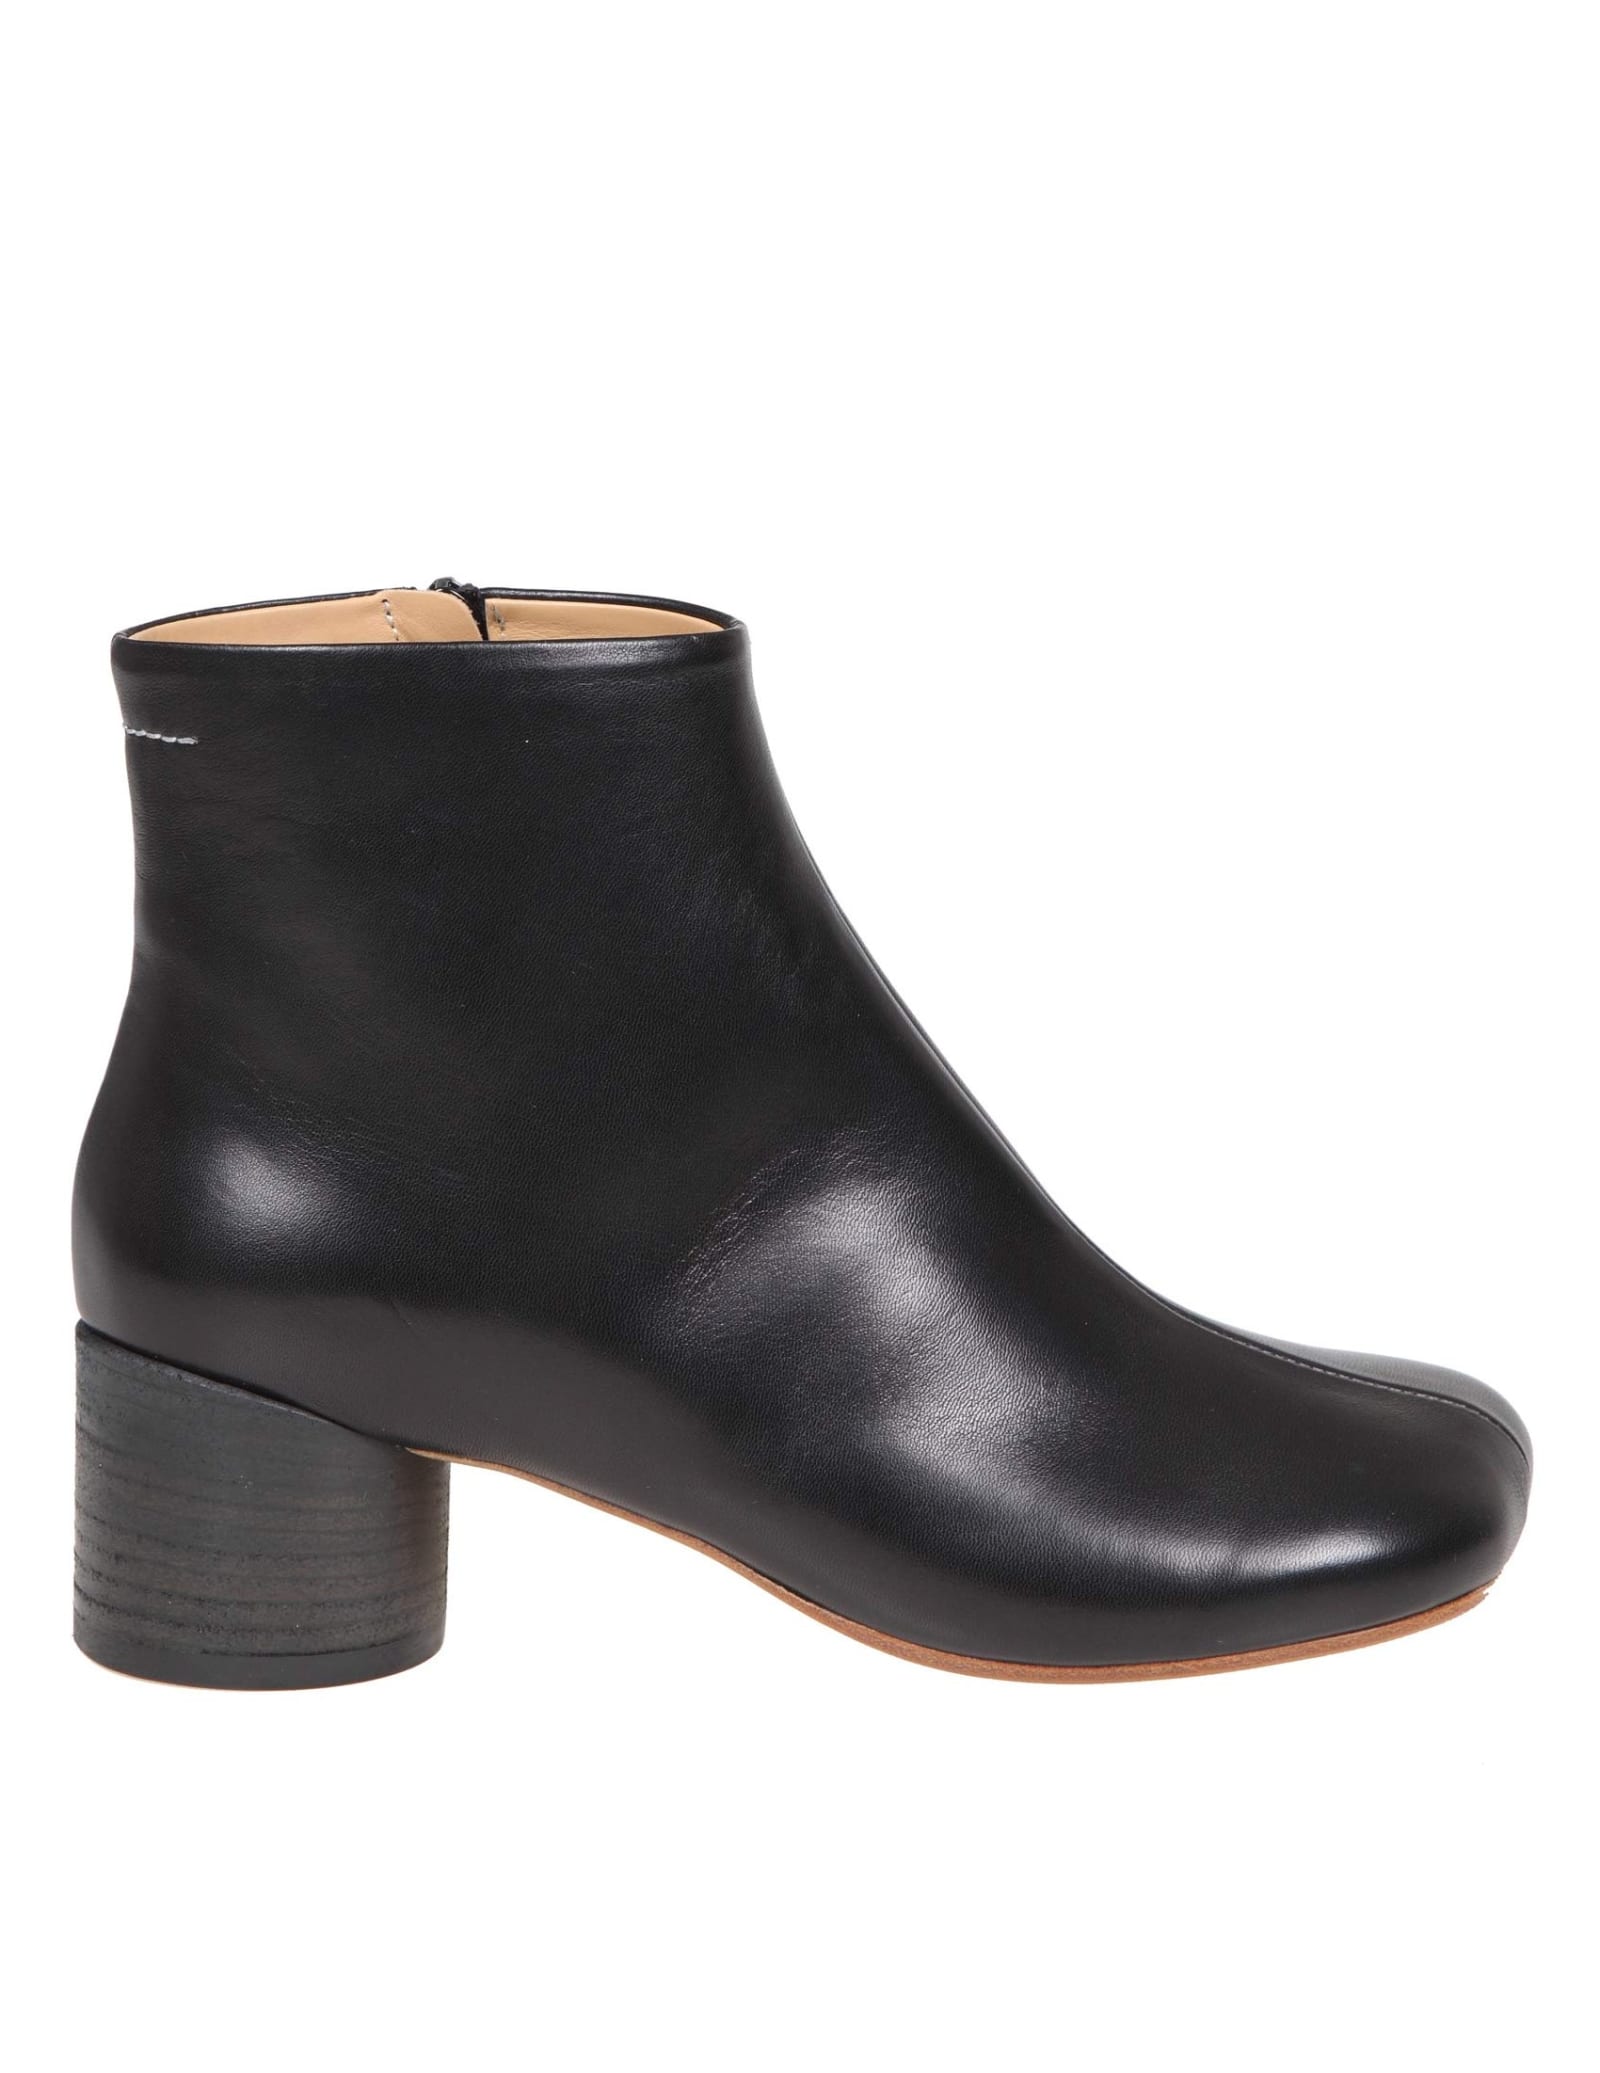 MM6 MAISON MARGIELA ANKLE BOOT IN BLACK COLOR LEATHER